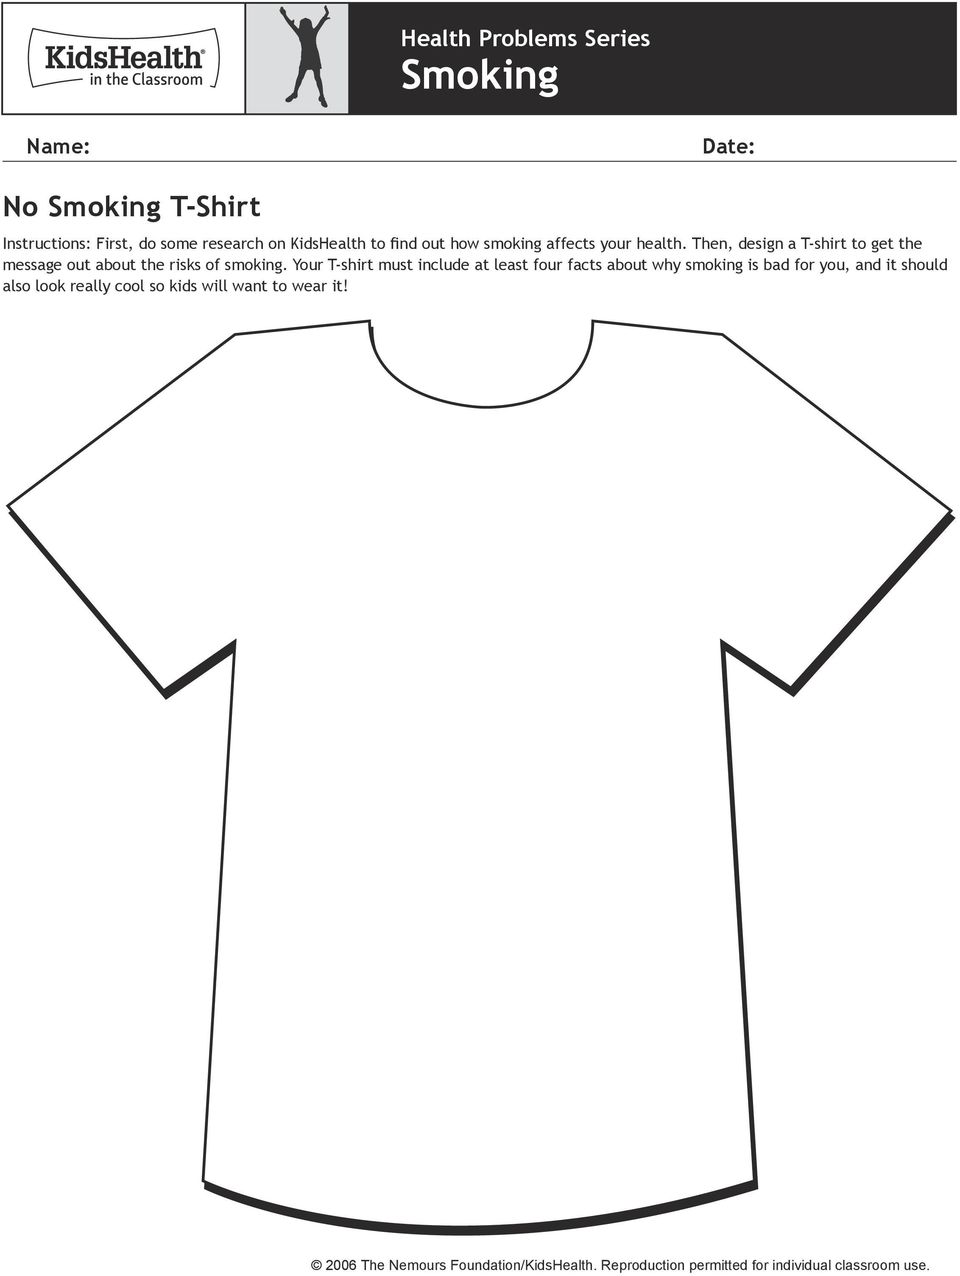 Then, design a T-shirt to get the message out about the risks of smoking.